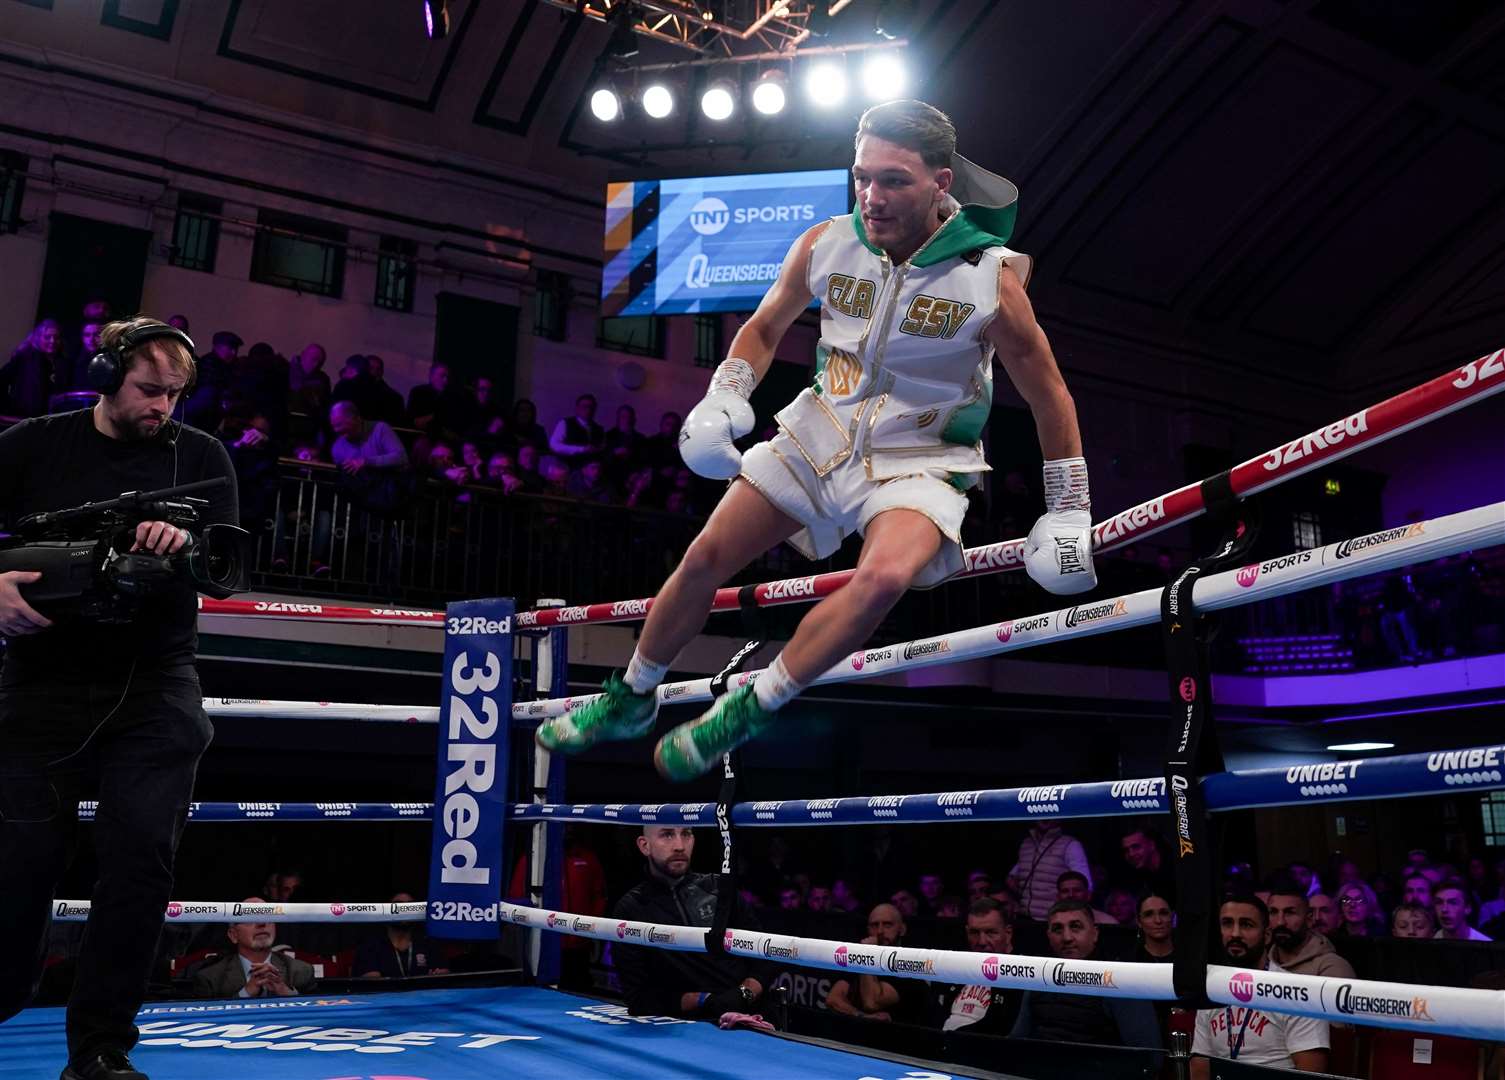 Charlie Hickford enjoyed himself at York Hall, with his first fight live on TNT Sports